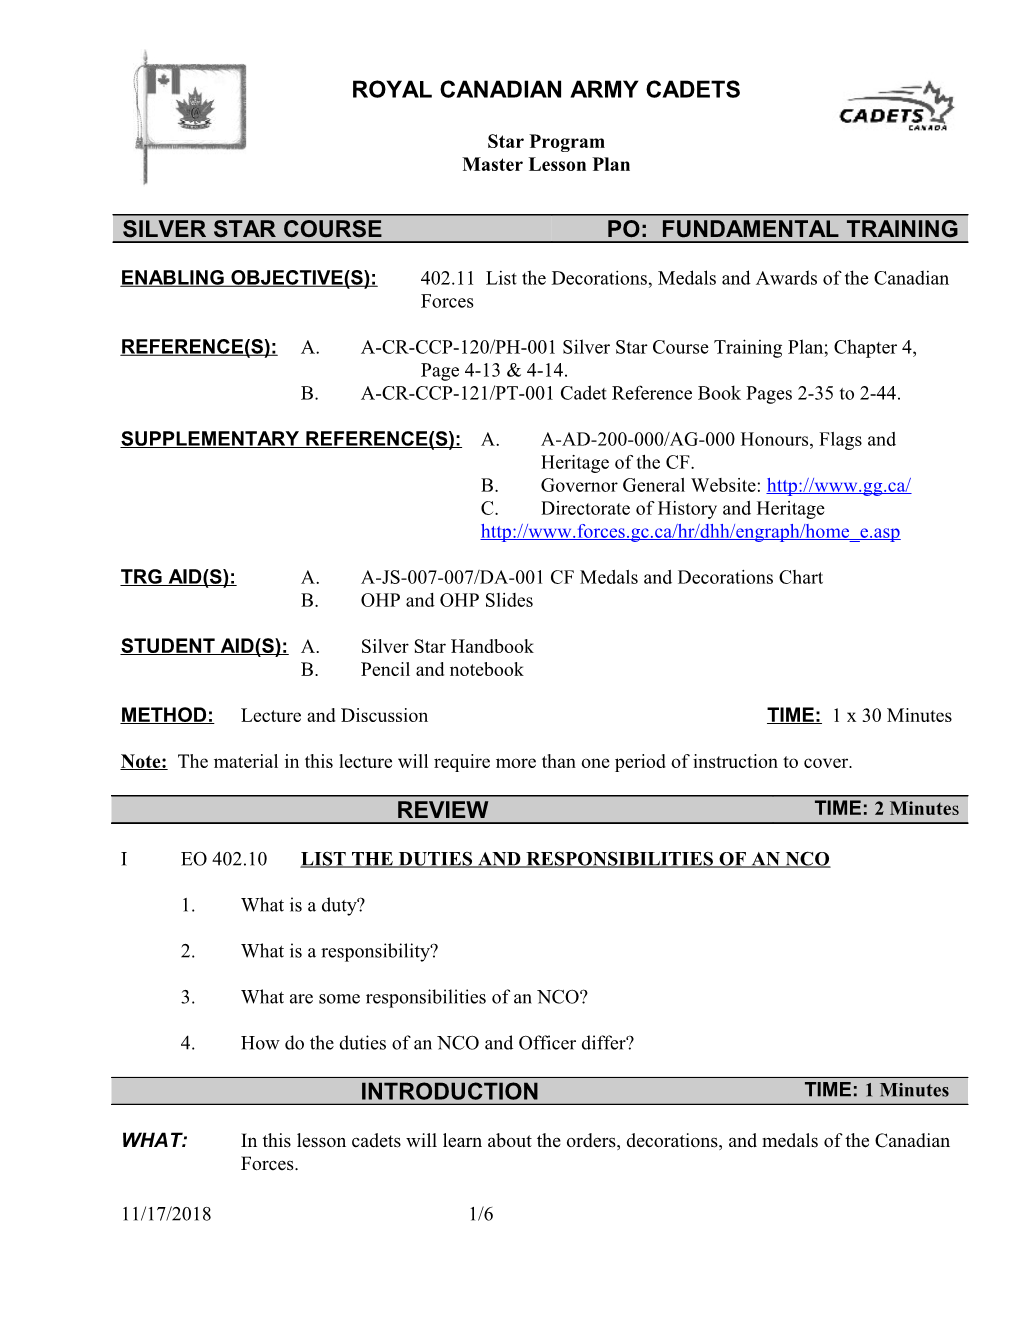 REFERENCE(S):A.A-CR-CCP-120/PH-001 Silver Star Course Training Plan; Chapter 4, Page 4-13